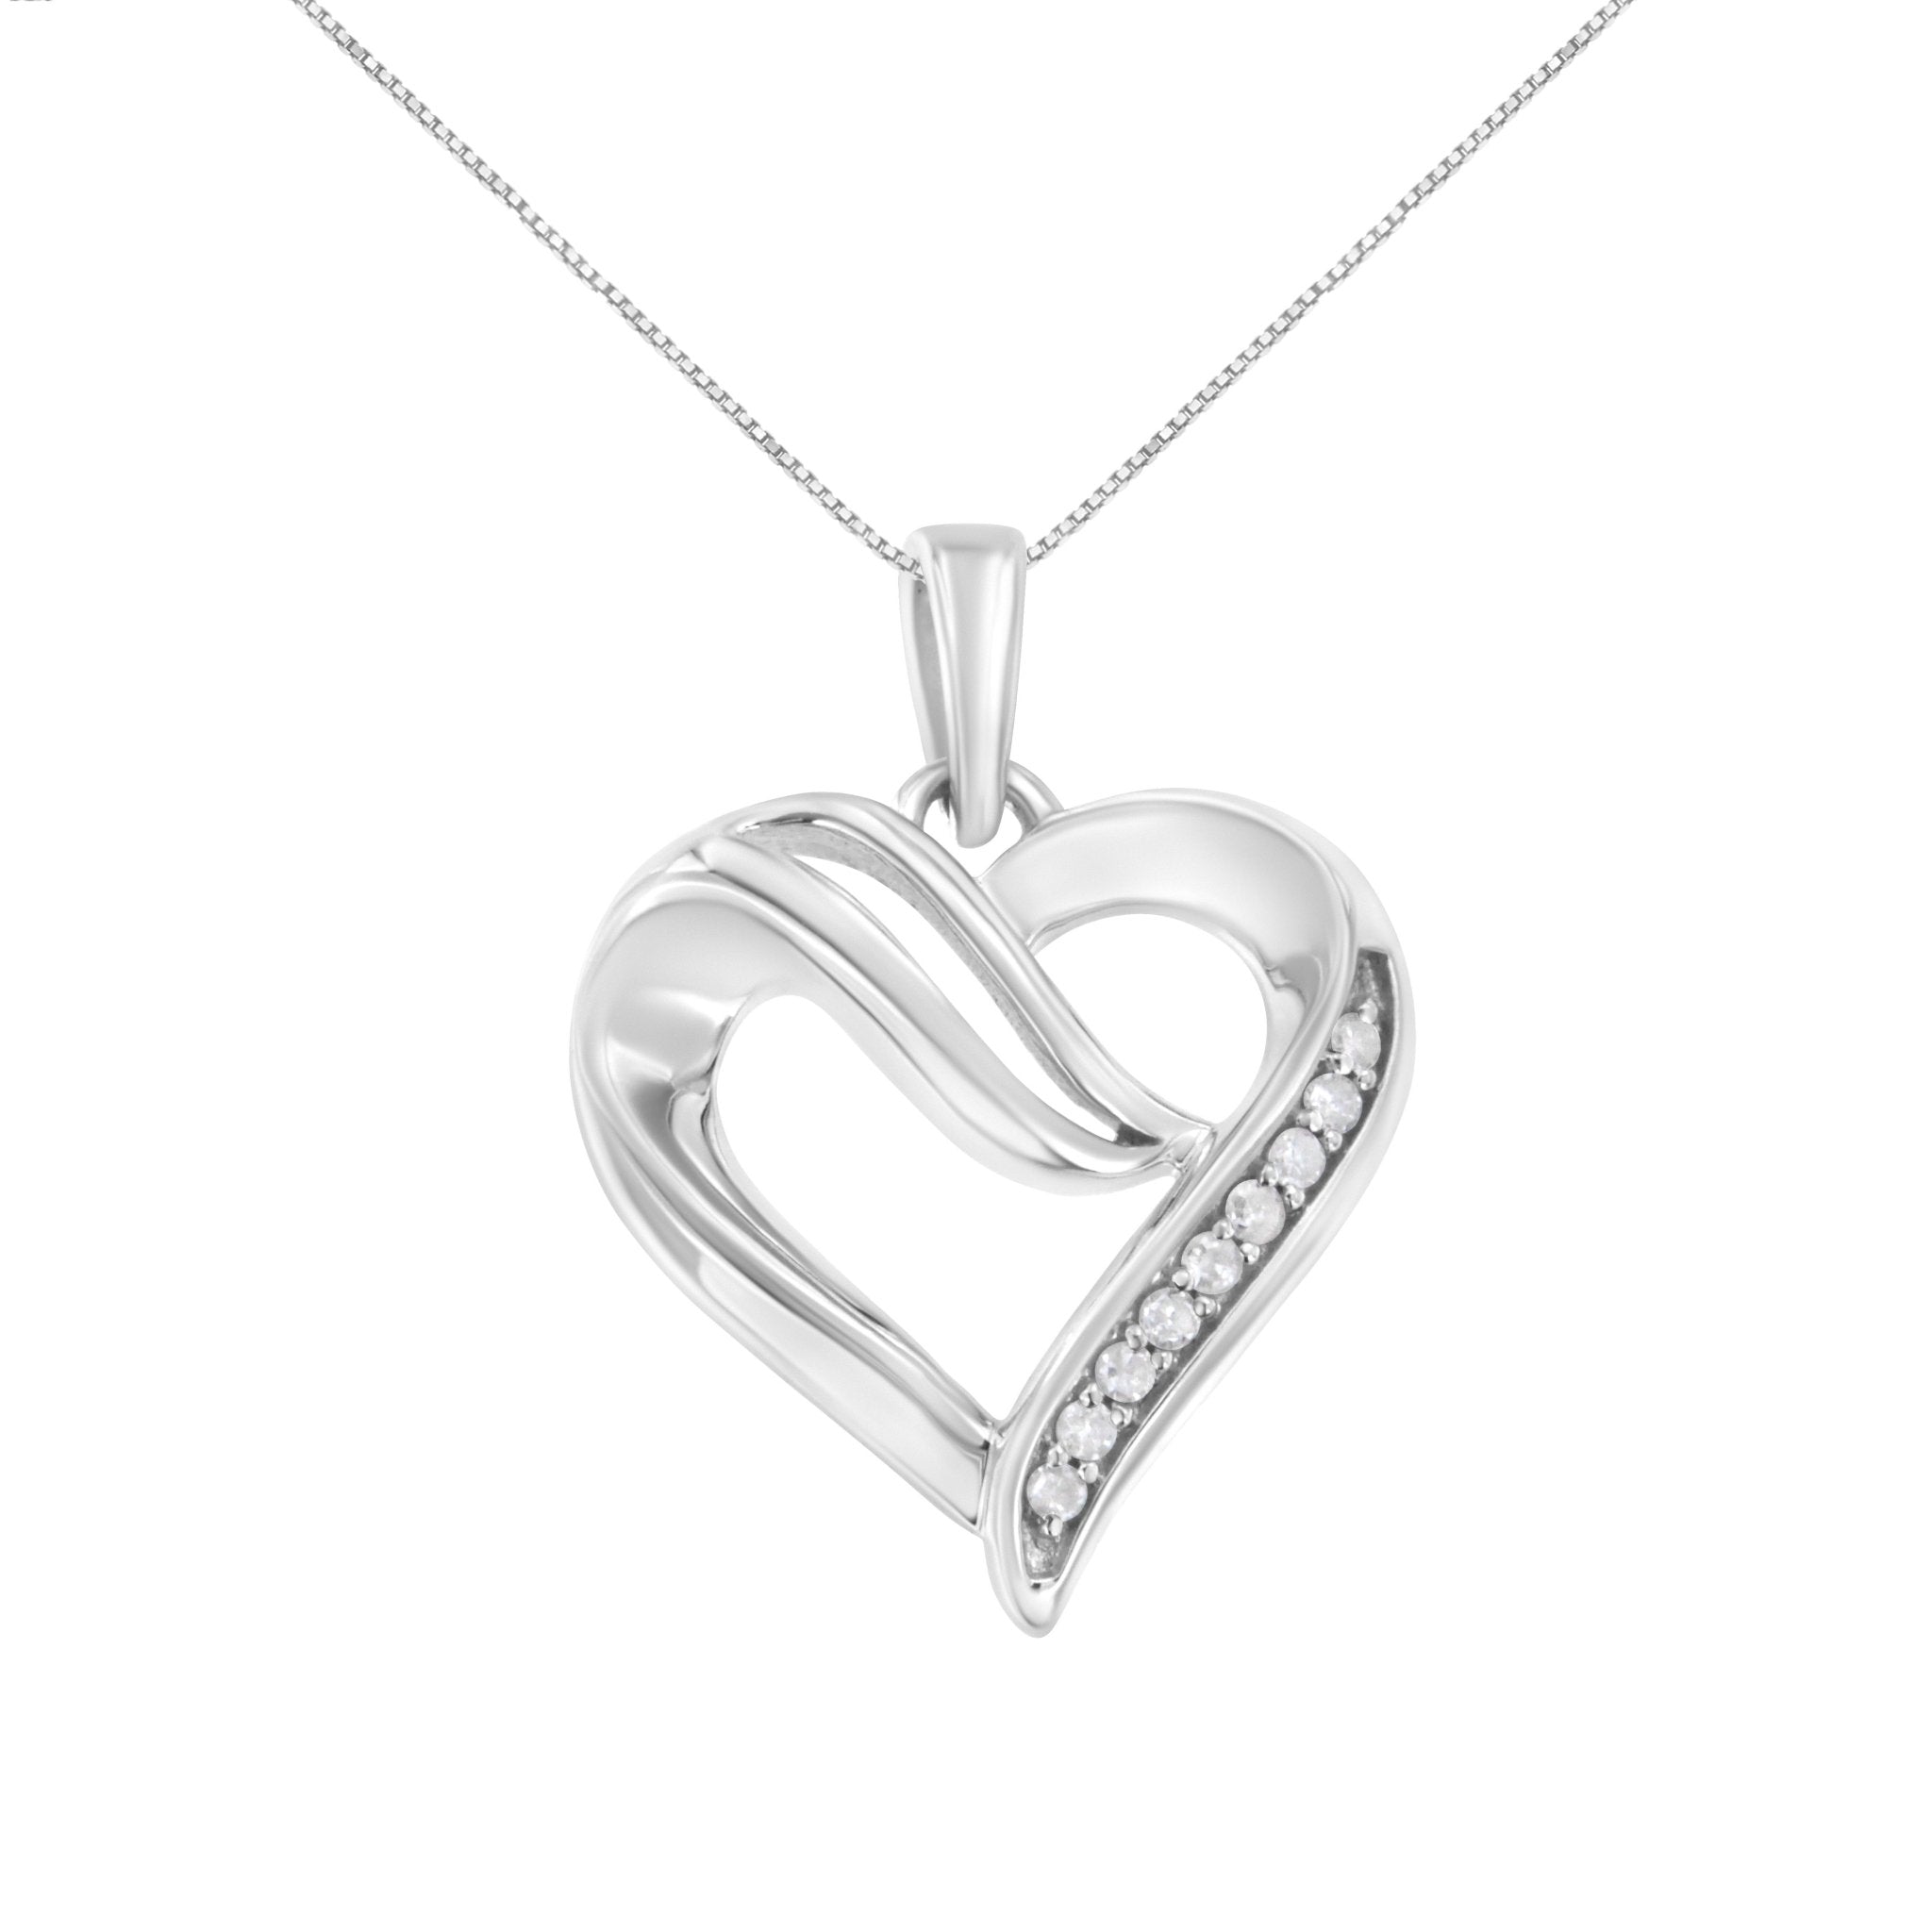 .925 Sterling Silver 1/10 Cttw Diamond Open Heart 18" Pendant Necklace (I-J Color, I2-I3 Clarity) - Tuesday Morning-Pendant Necklace